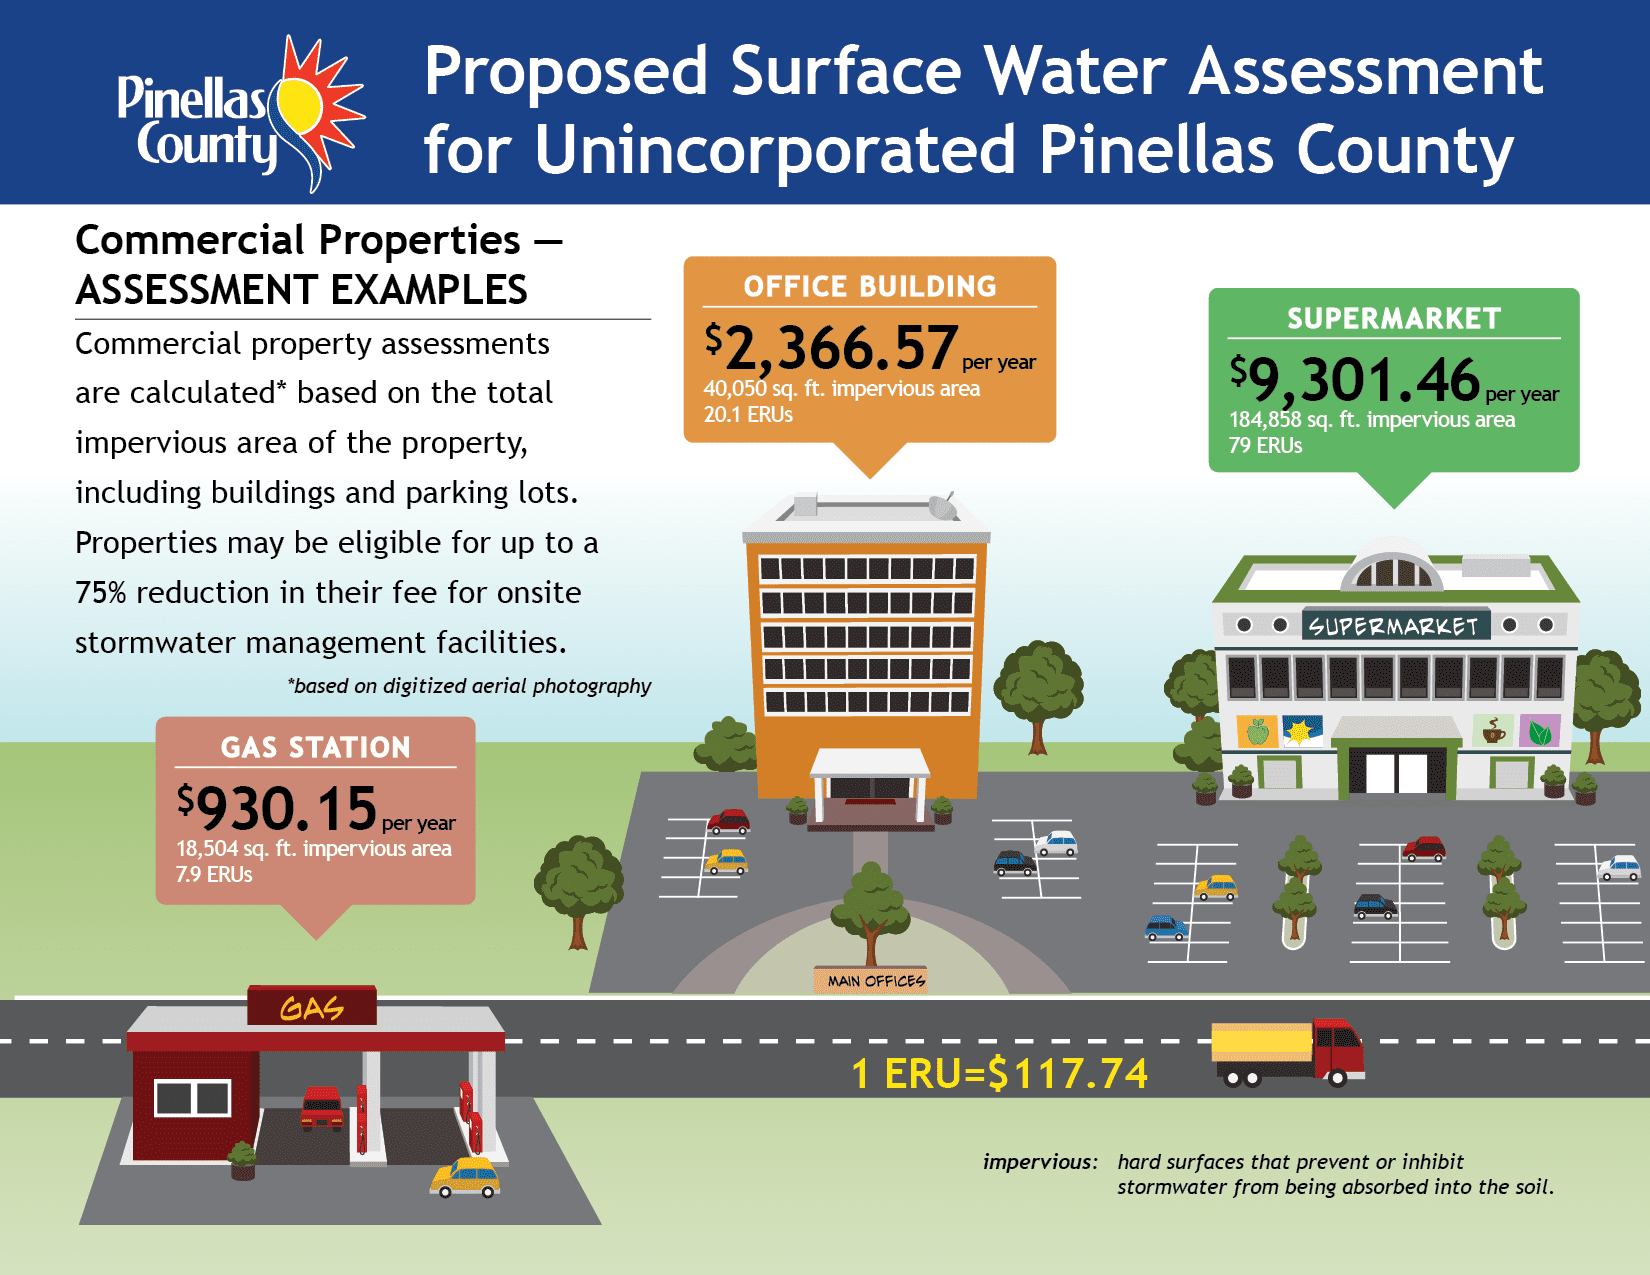 click to get a pdf of the Proposed Commercial Surface Water Assessment for Unincorporated Pinellas County